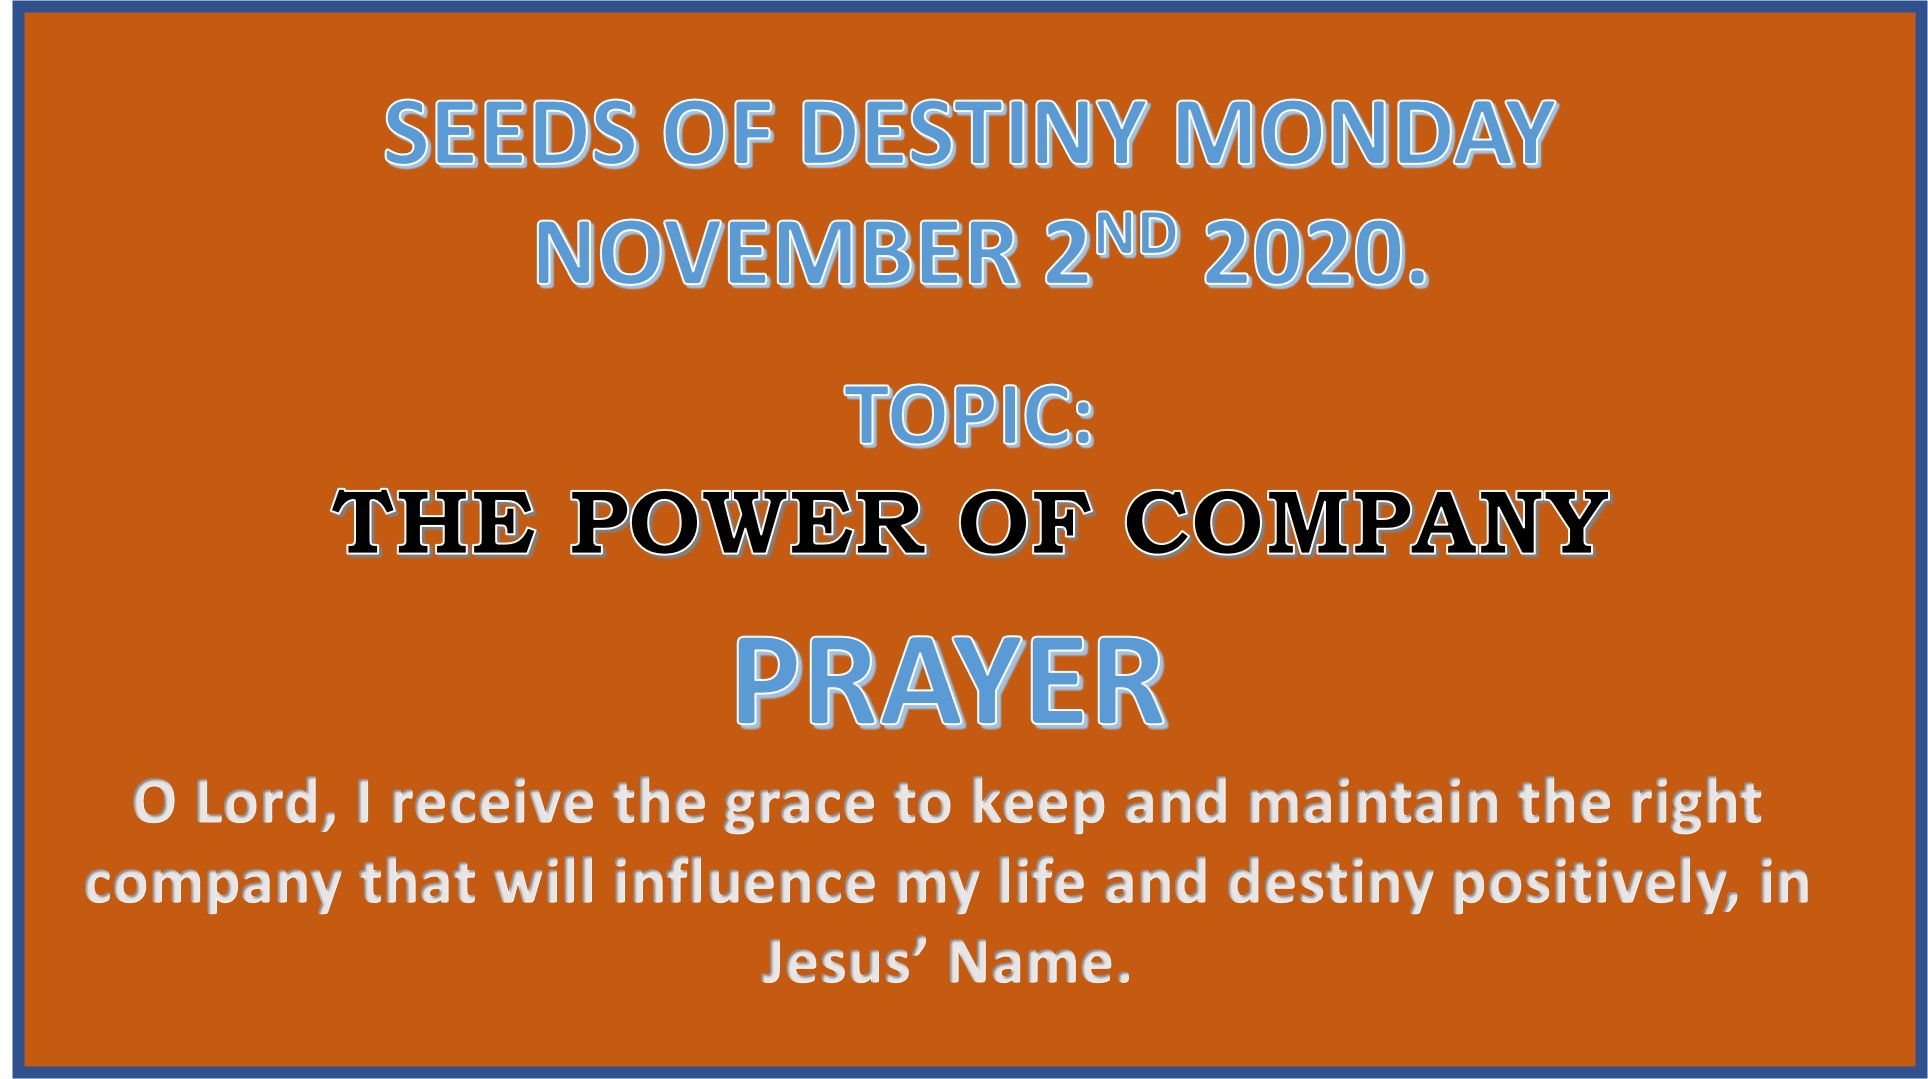 Seeds of Destiny Monday 2nd November 2020 by Dr Paul Enenche